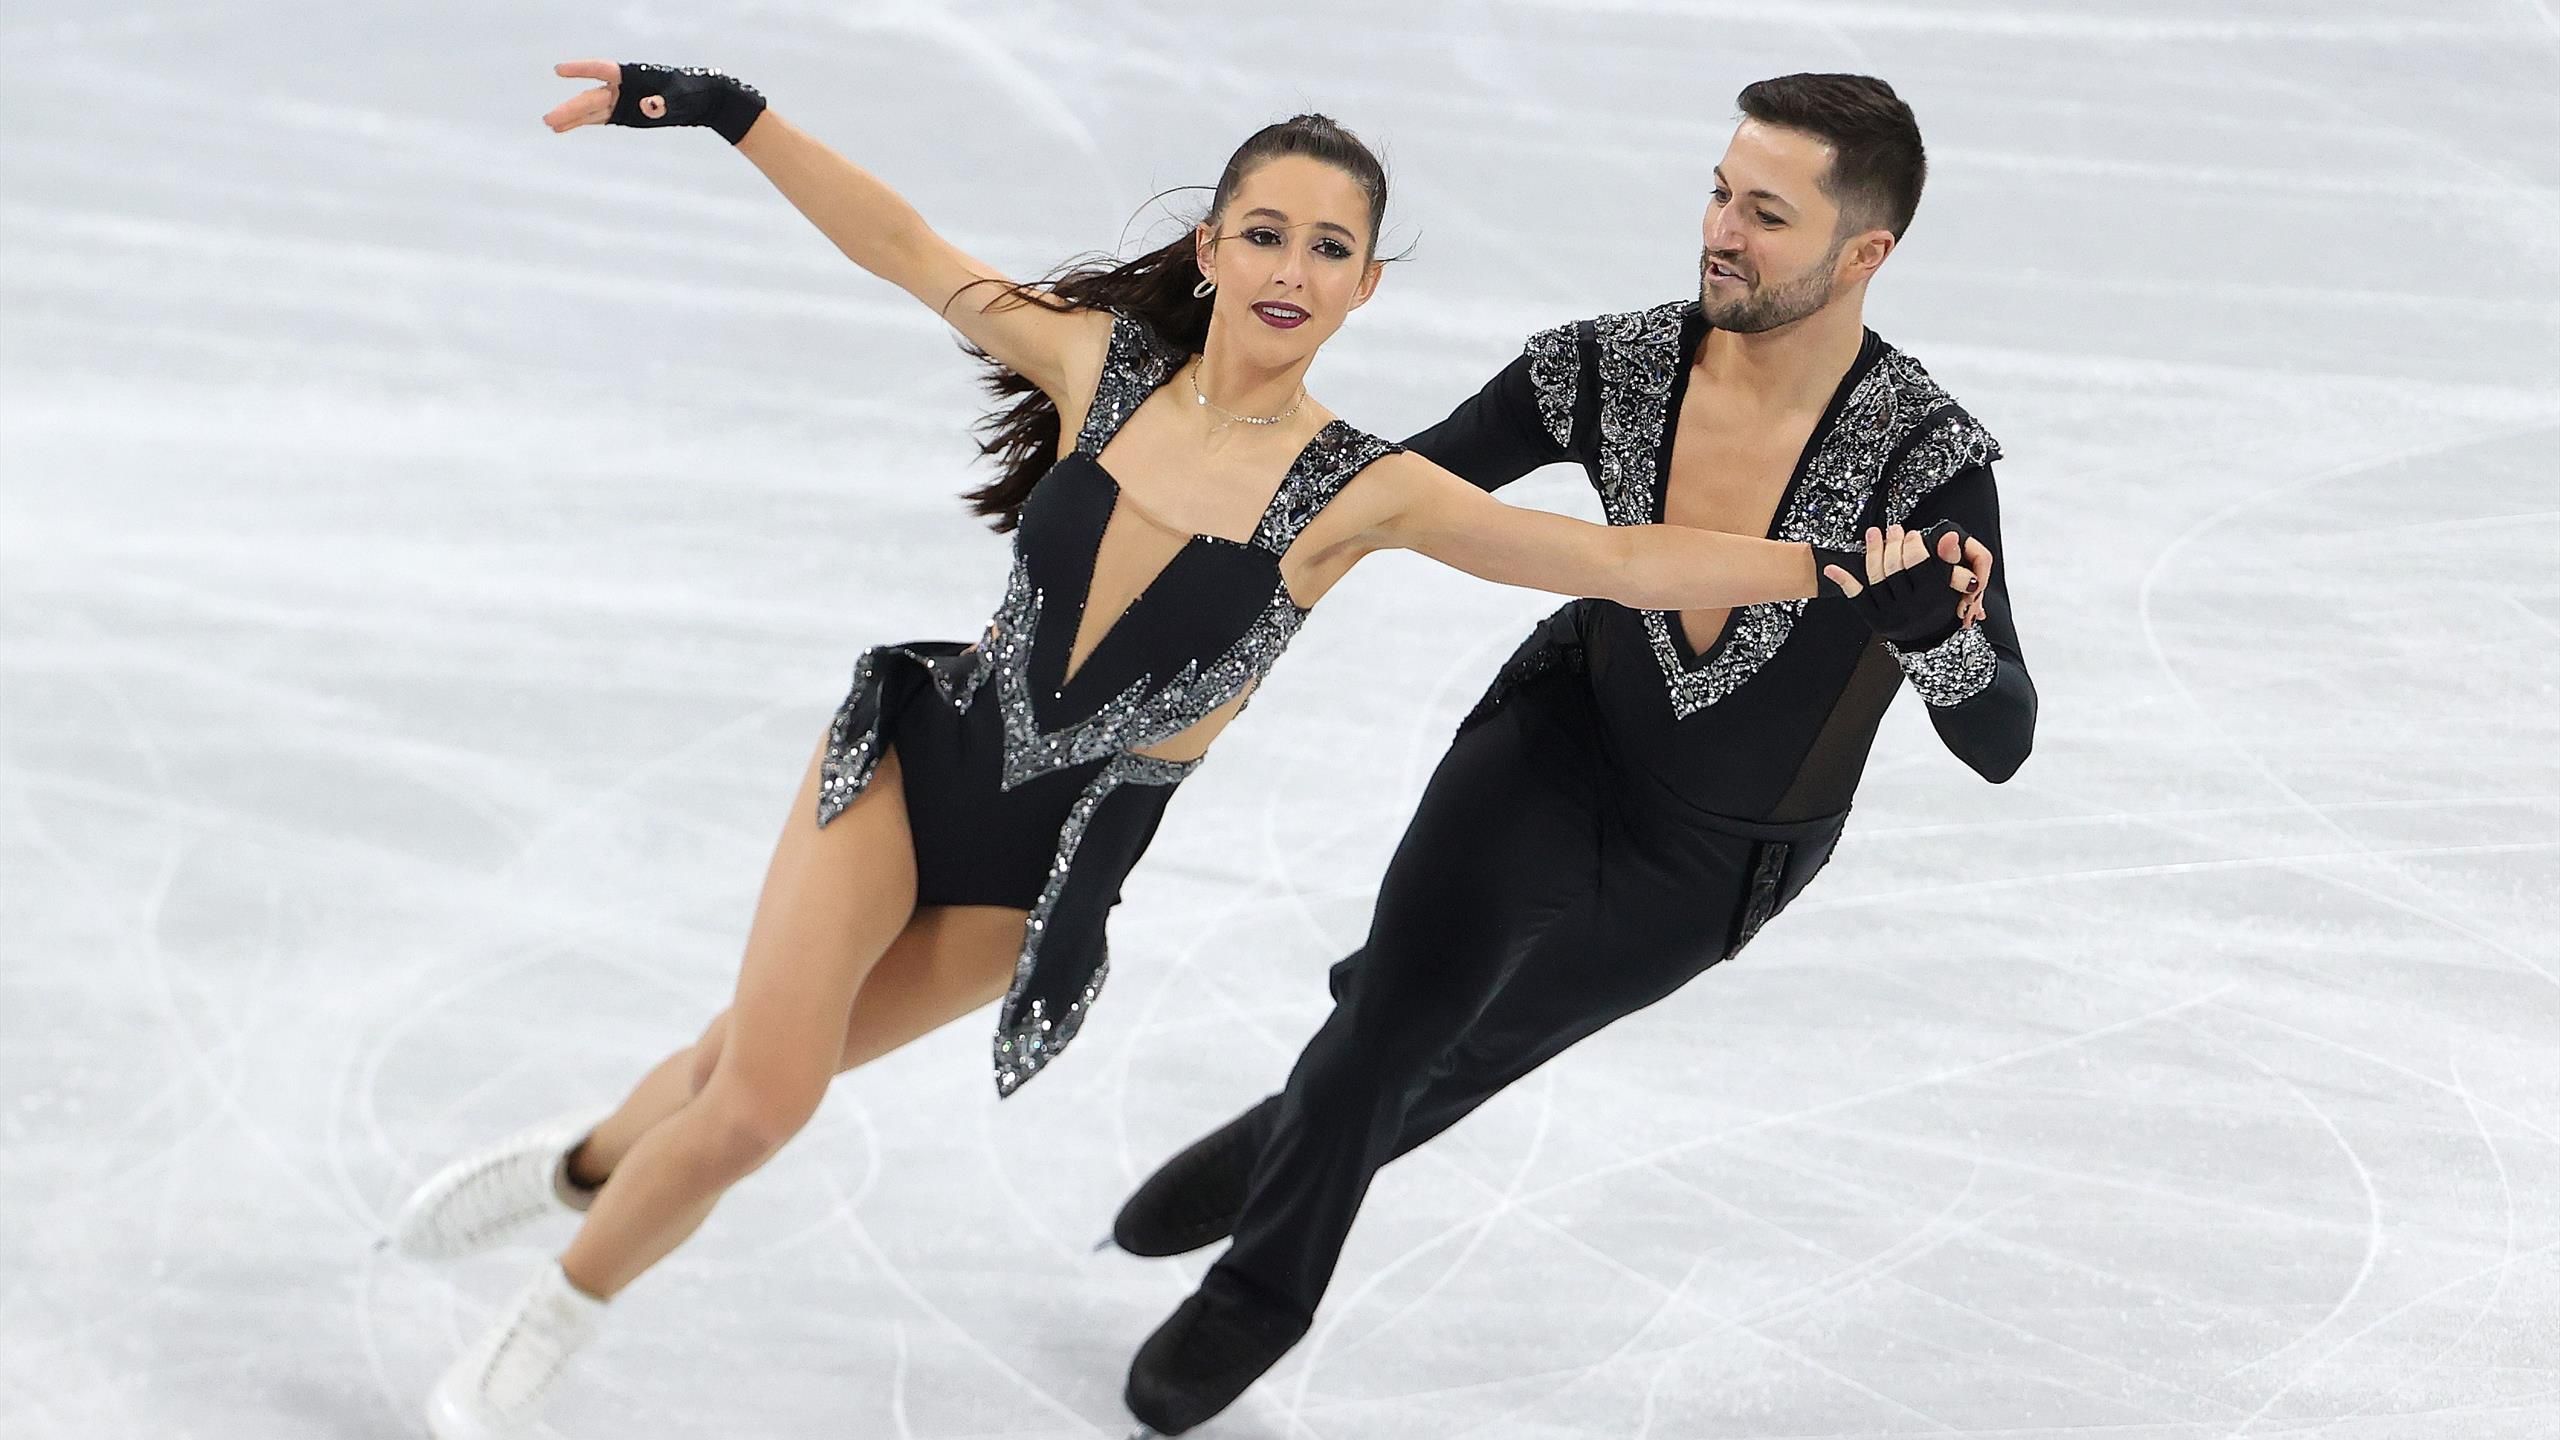 Winter Olympics 2022 - How are figure skating scores judged? Who chooses outfits?